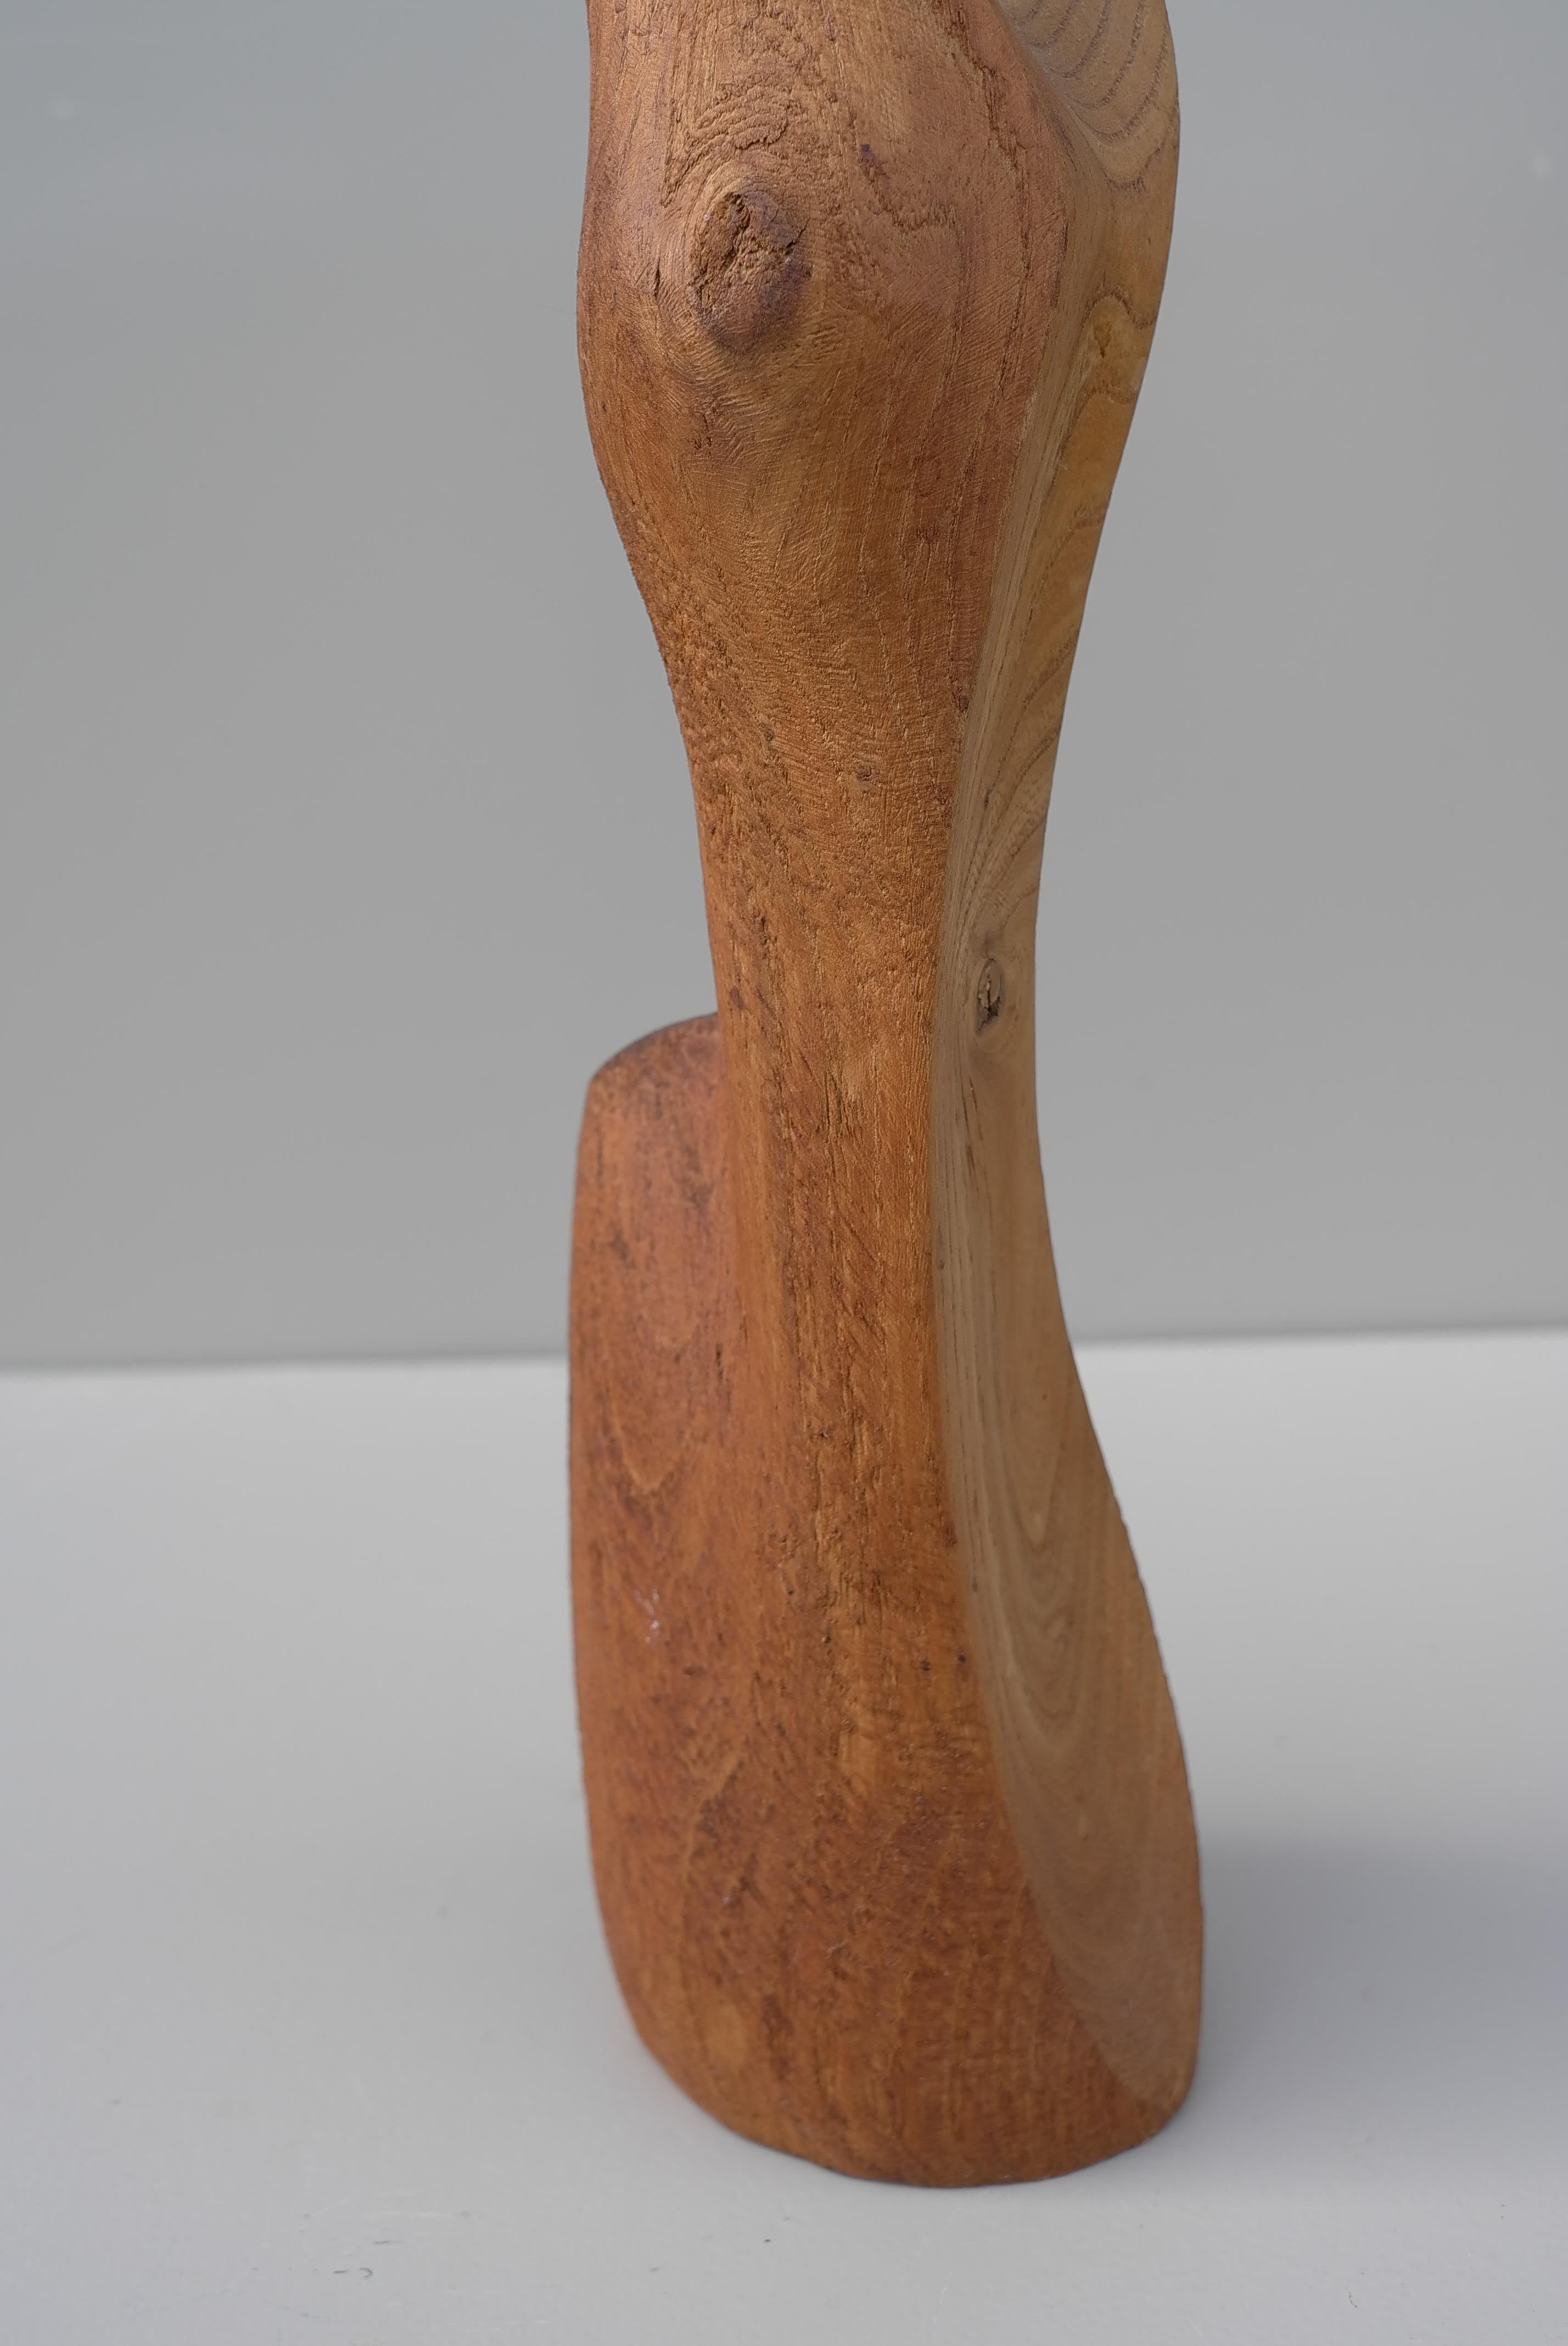  Abstract Mid-Century Modern Organic Wooden Sculpture, 1960's For Sale 5